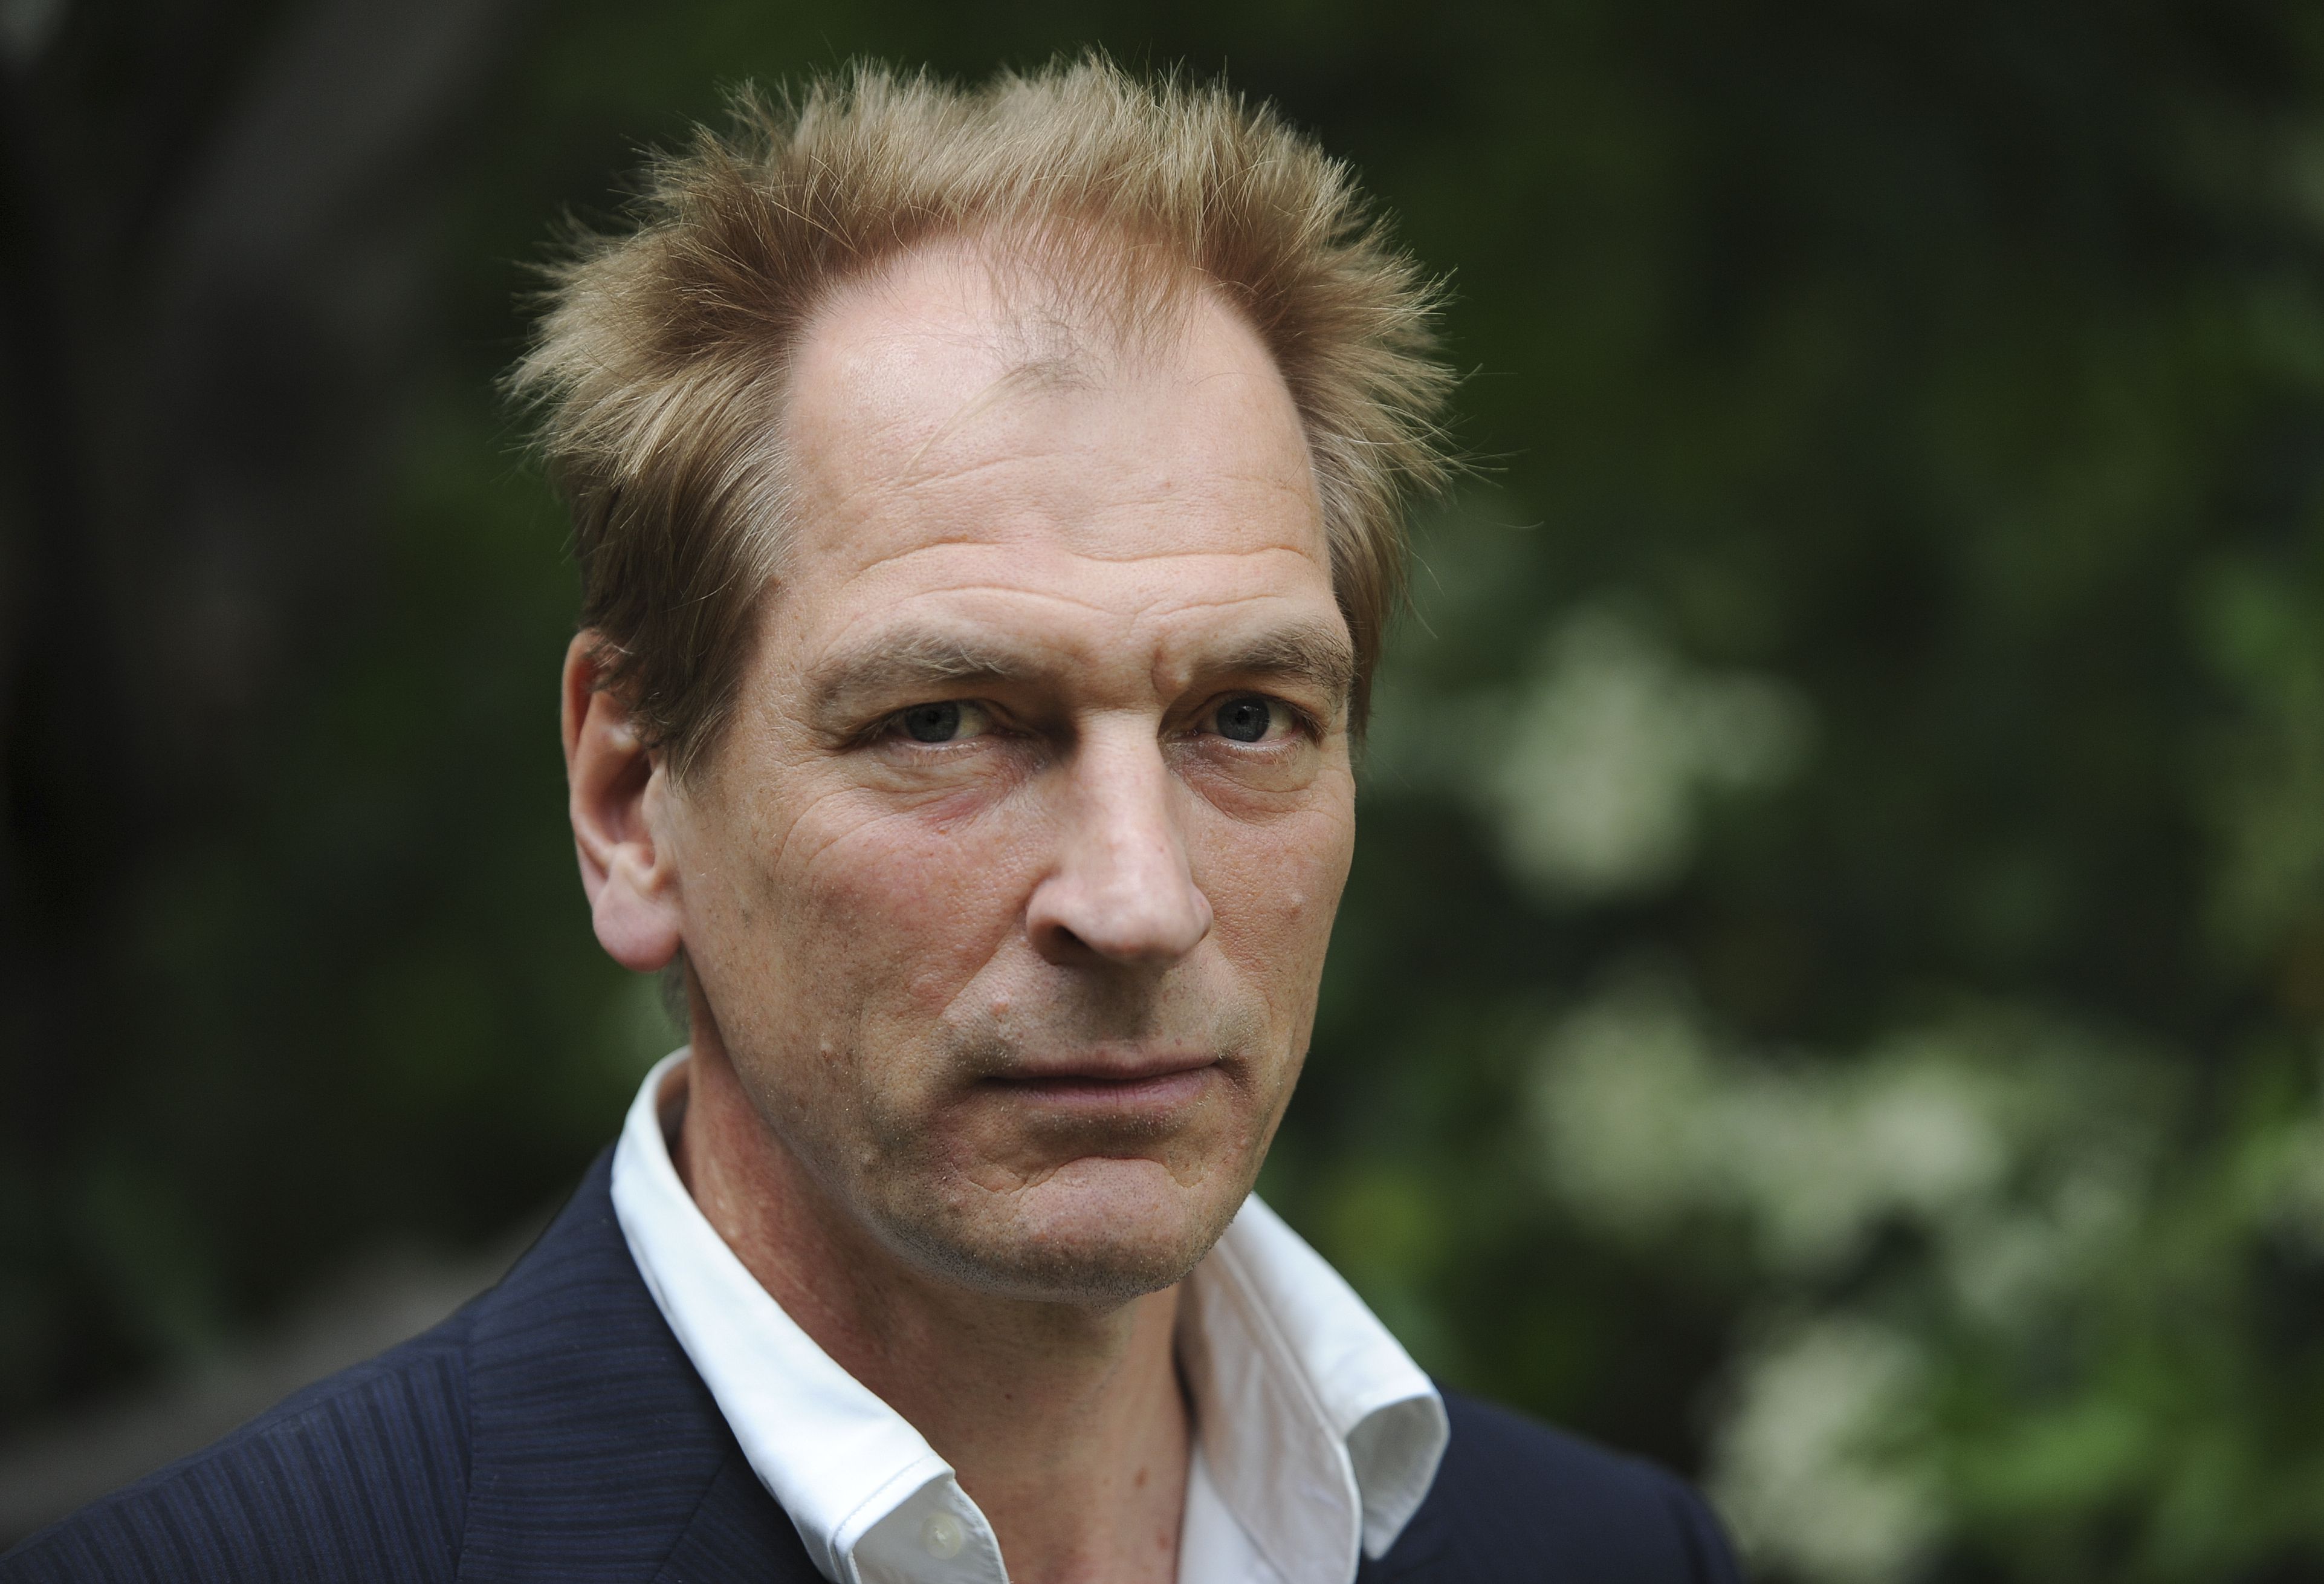 Actor Julian Sands missing in Southern California mountains